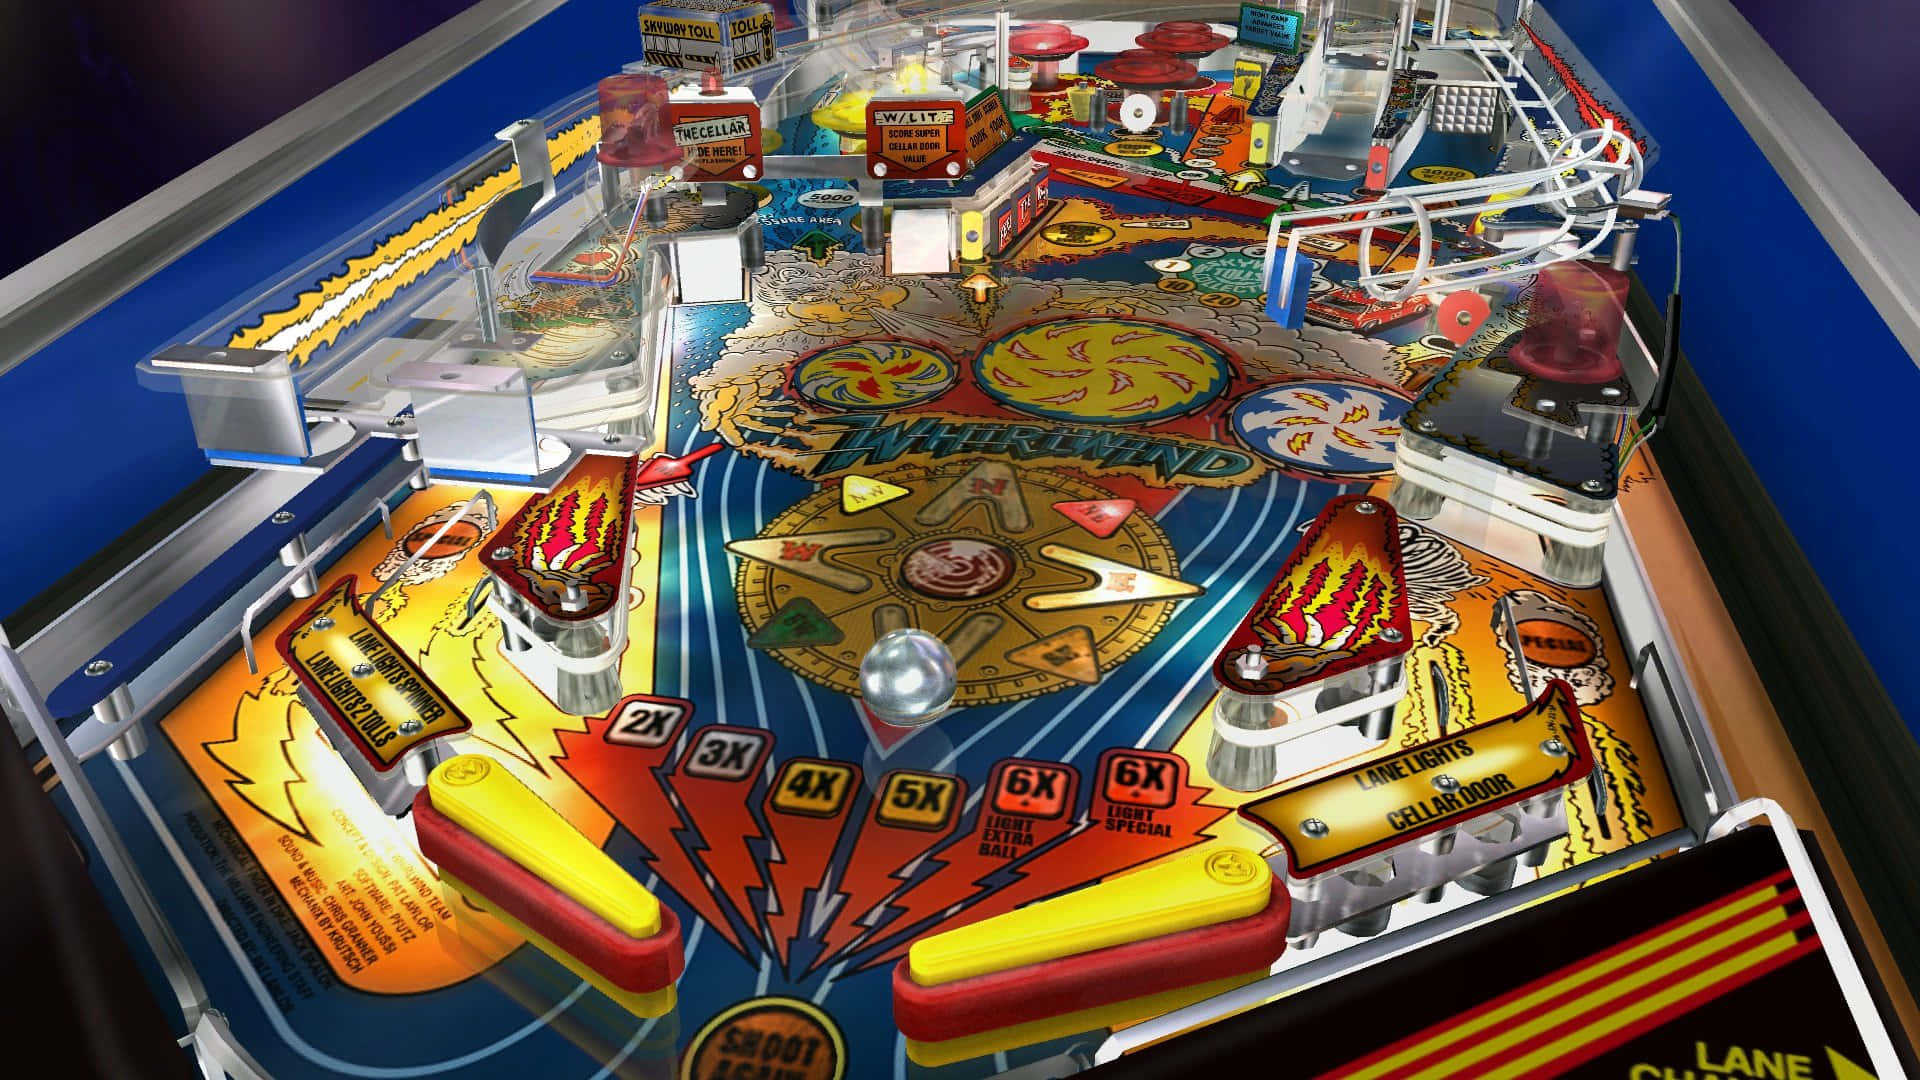 Vibrant Pinball Game In Action Wallpaper